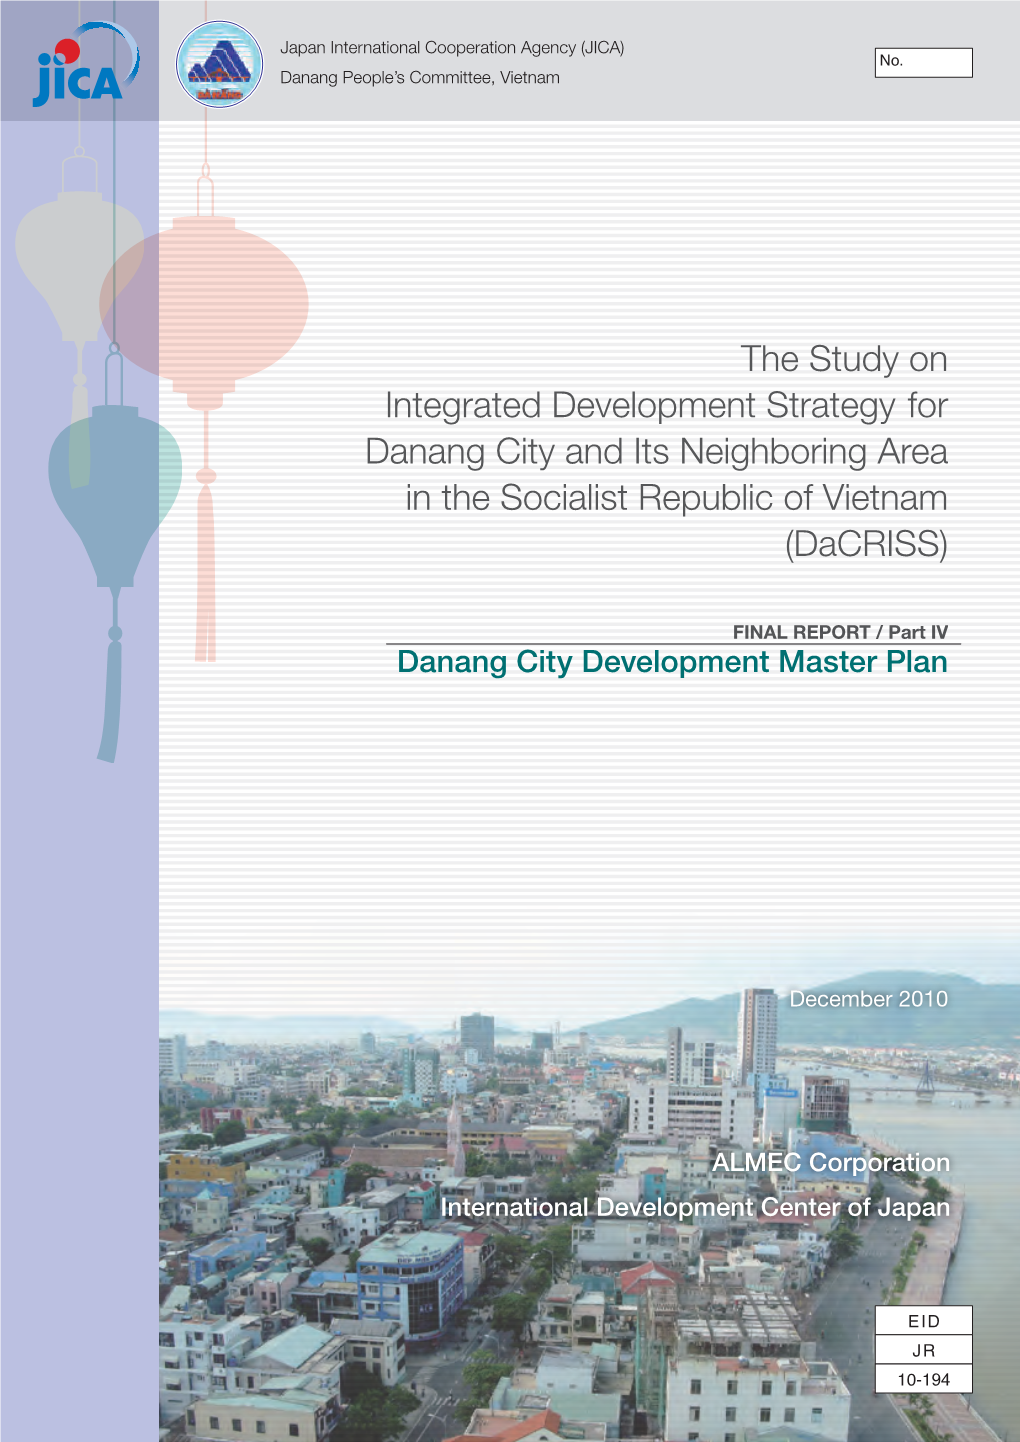 The Study on Integrated Development Strategy for Danang City and Its